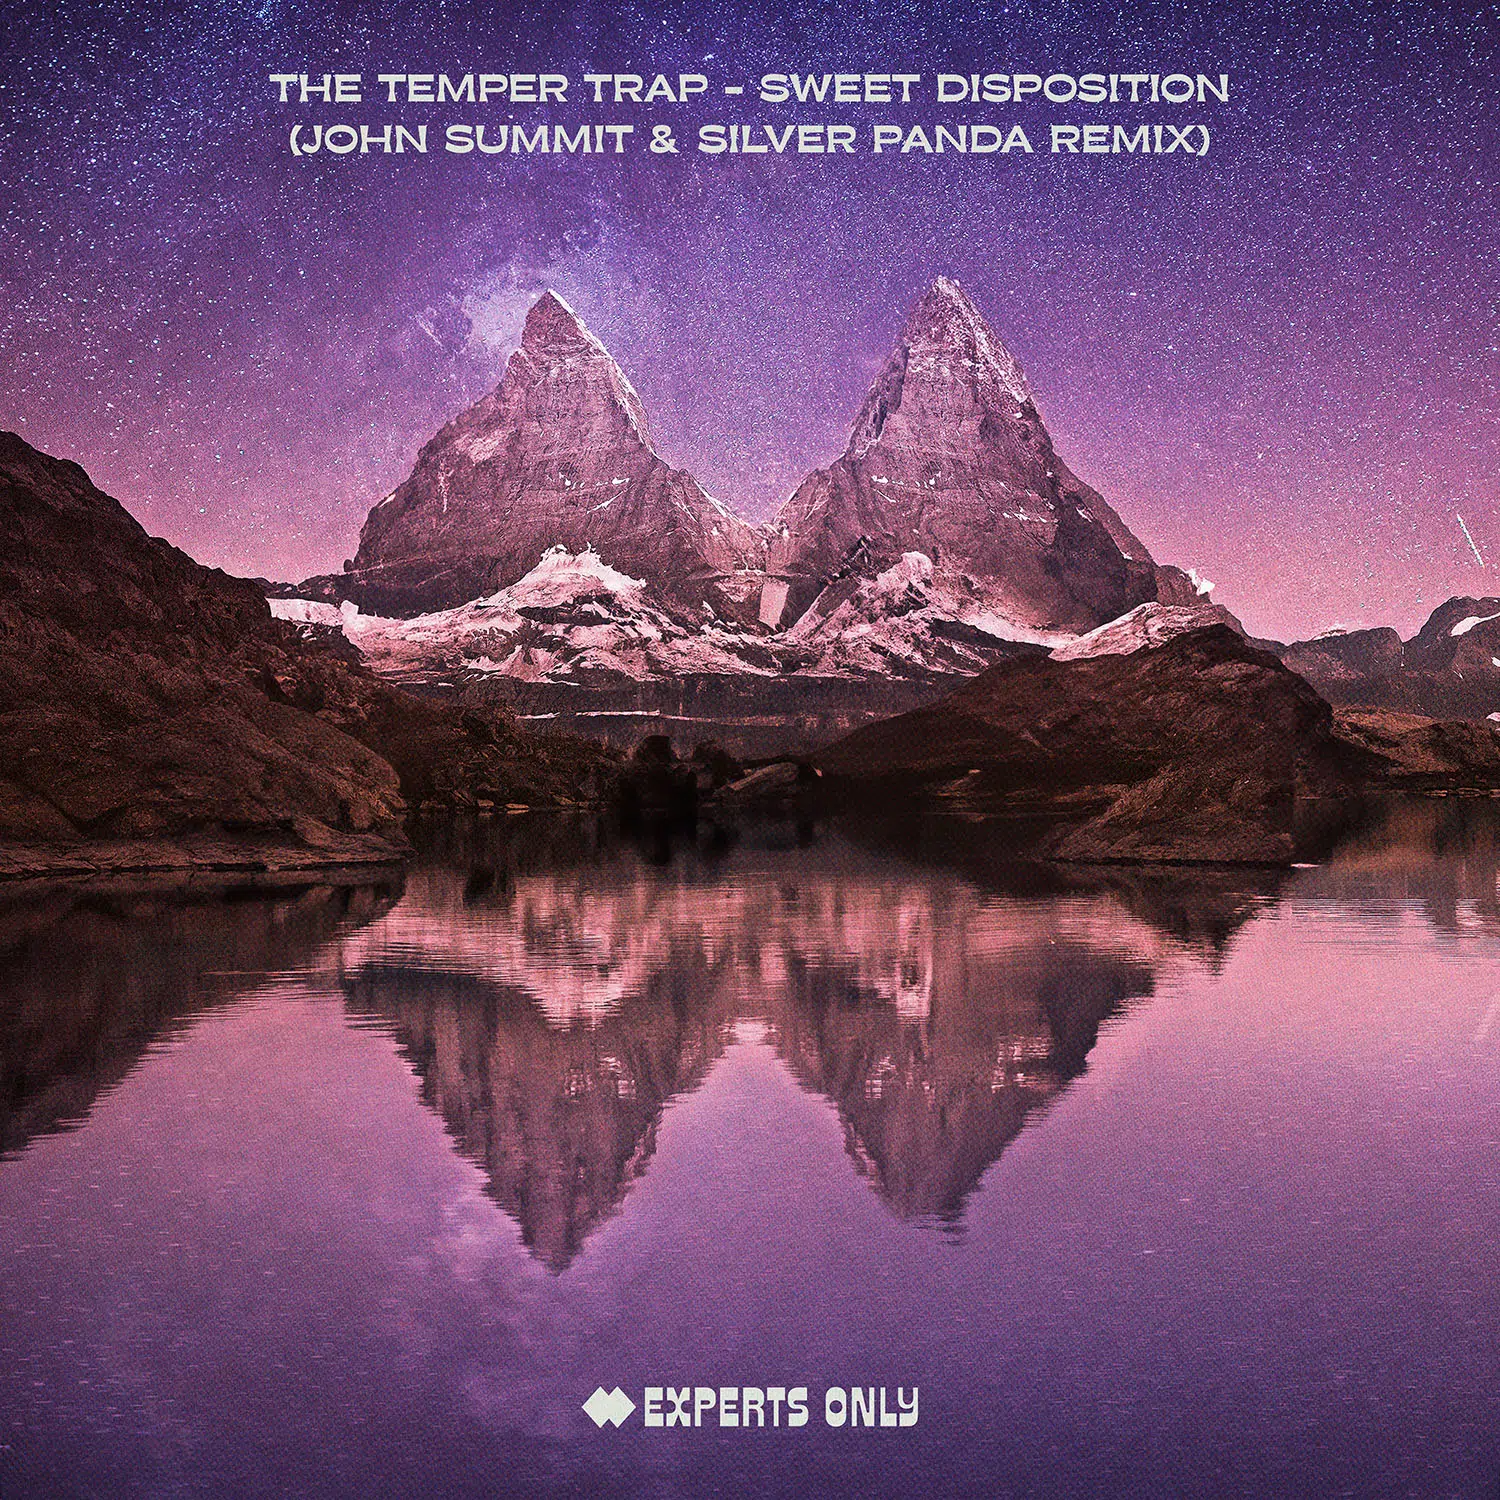 John Summit Remix of The Temper Trap “Sweet Disposition”